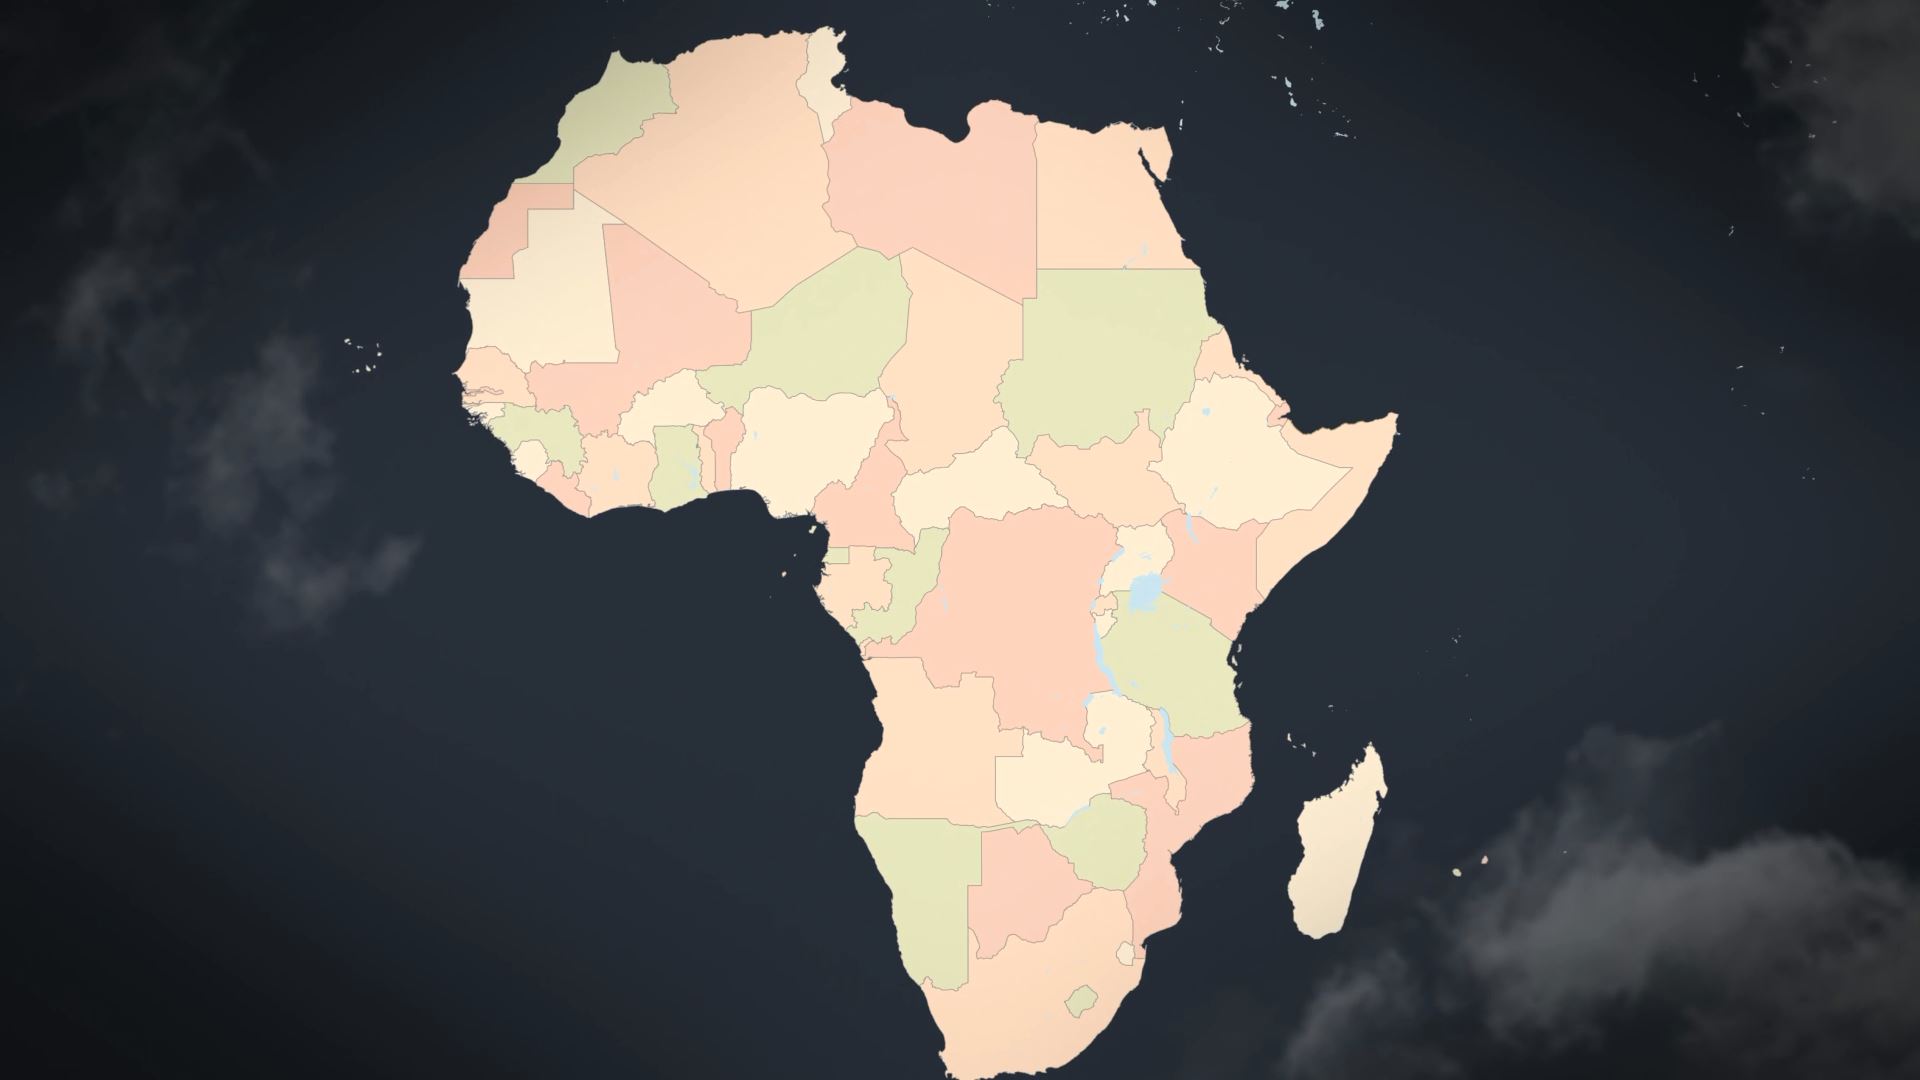  Africa Animated Map - Africa Map Kit 